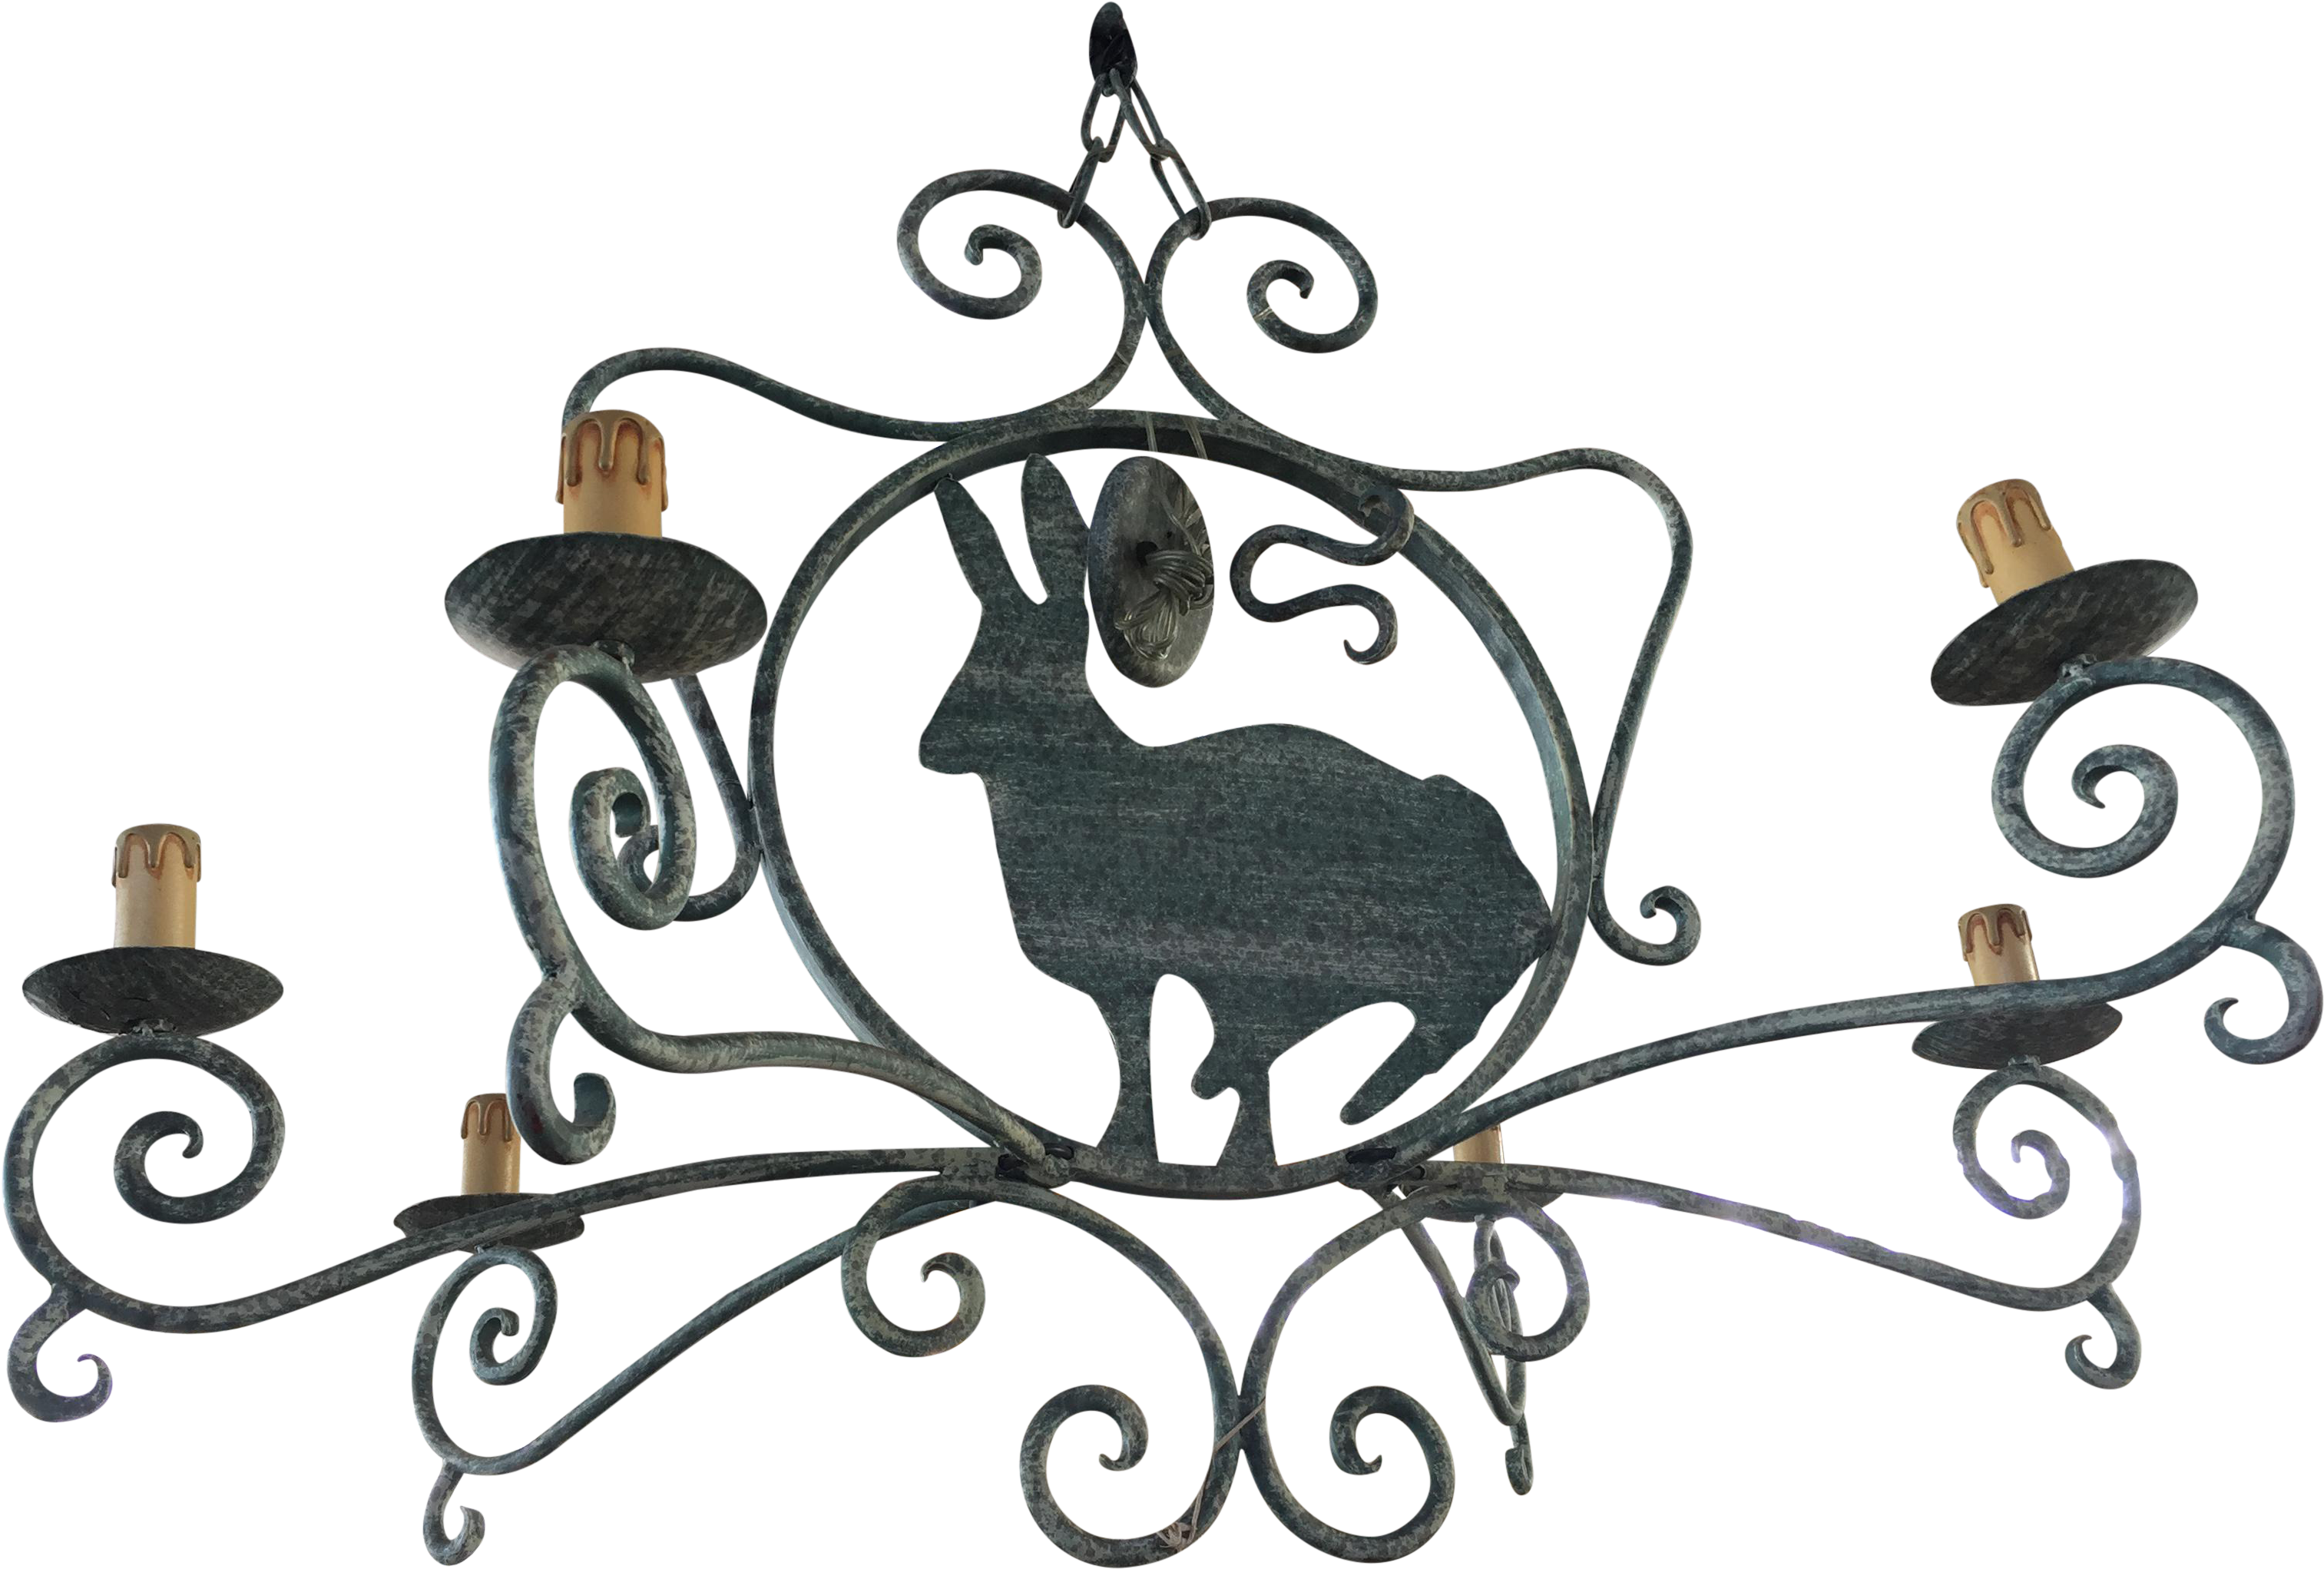 French Green Wrought Iron With Rabbit Chairish Ⓒ - Chandelier (3361x2269)